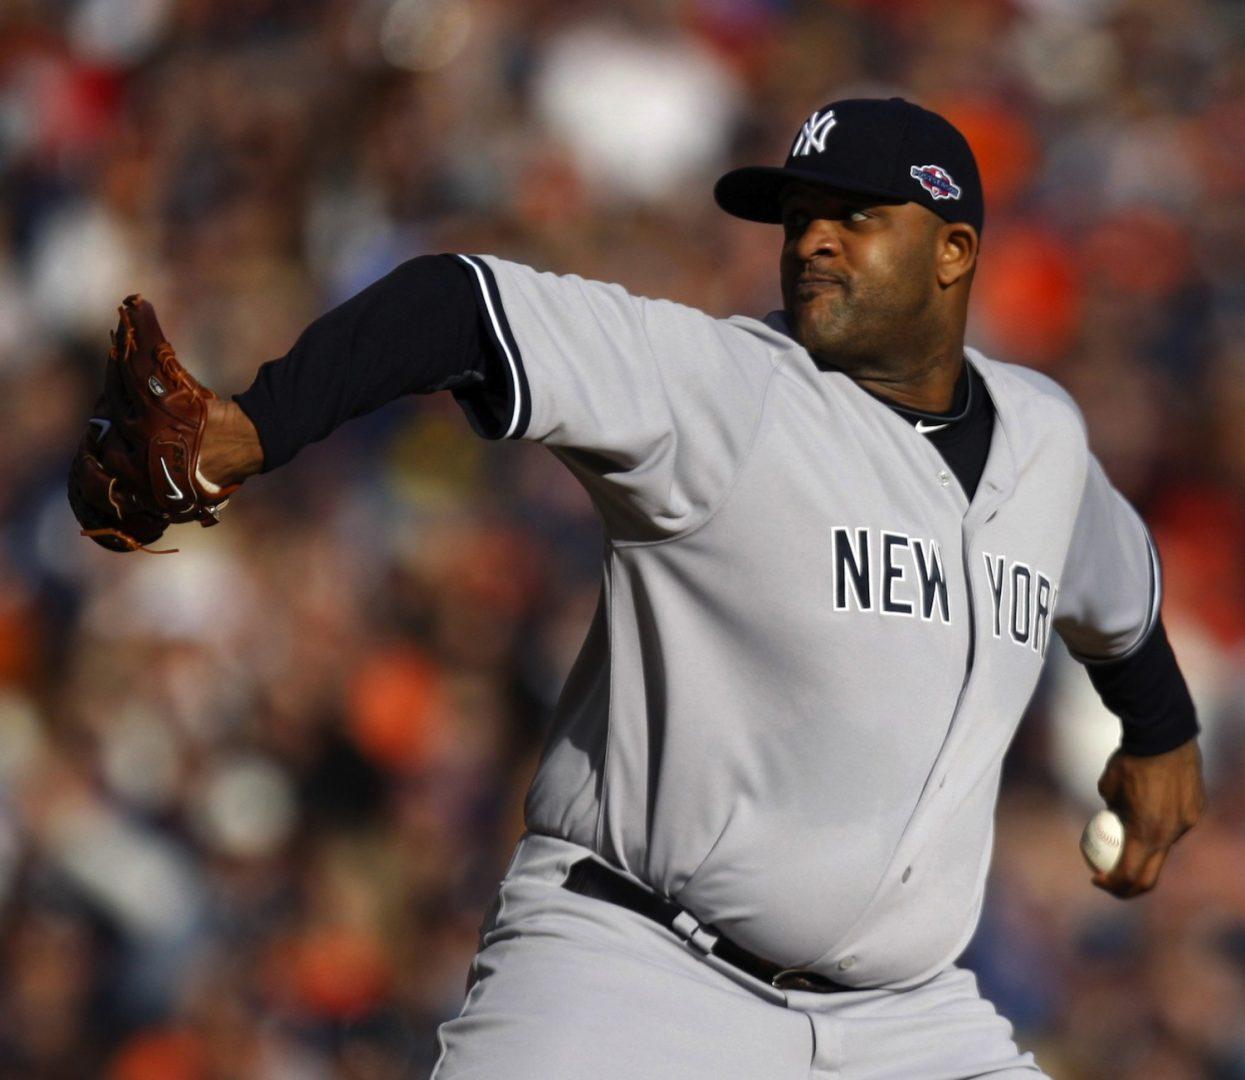 Yankees pitcher C.C. Sabathia figures to be the anchor of the rotation again as the team tries to reach the World Series. (Julian H. Gonzalez/Detroit Free Press/MCT)